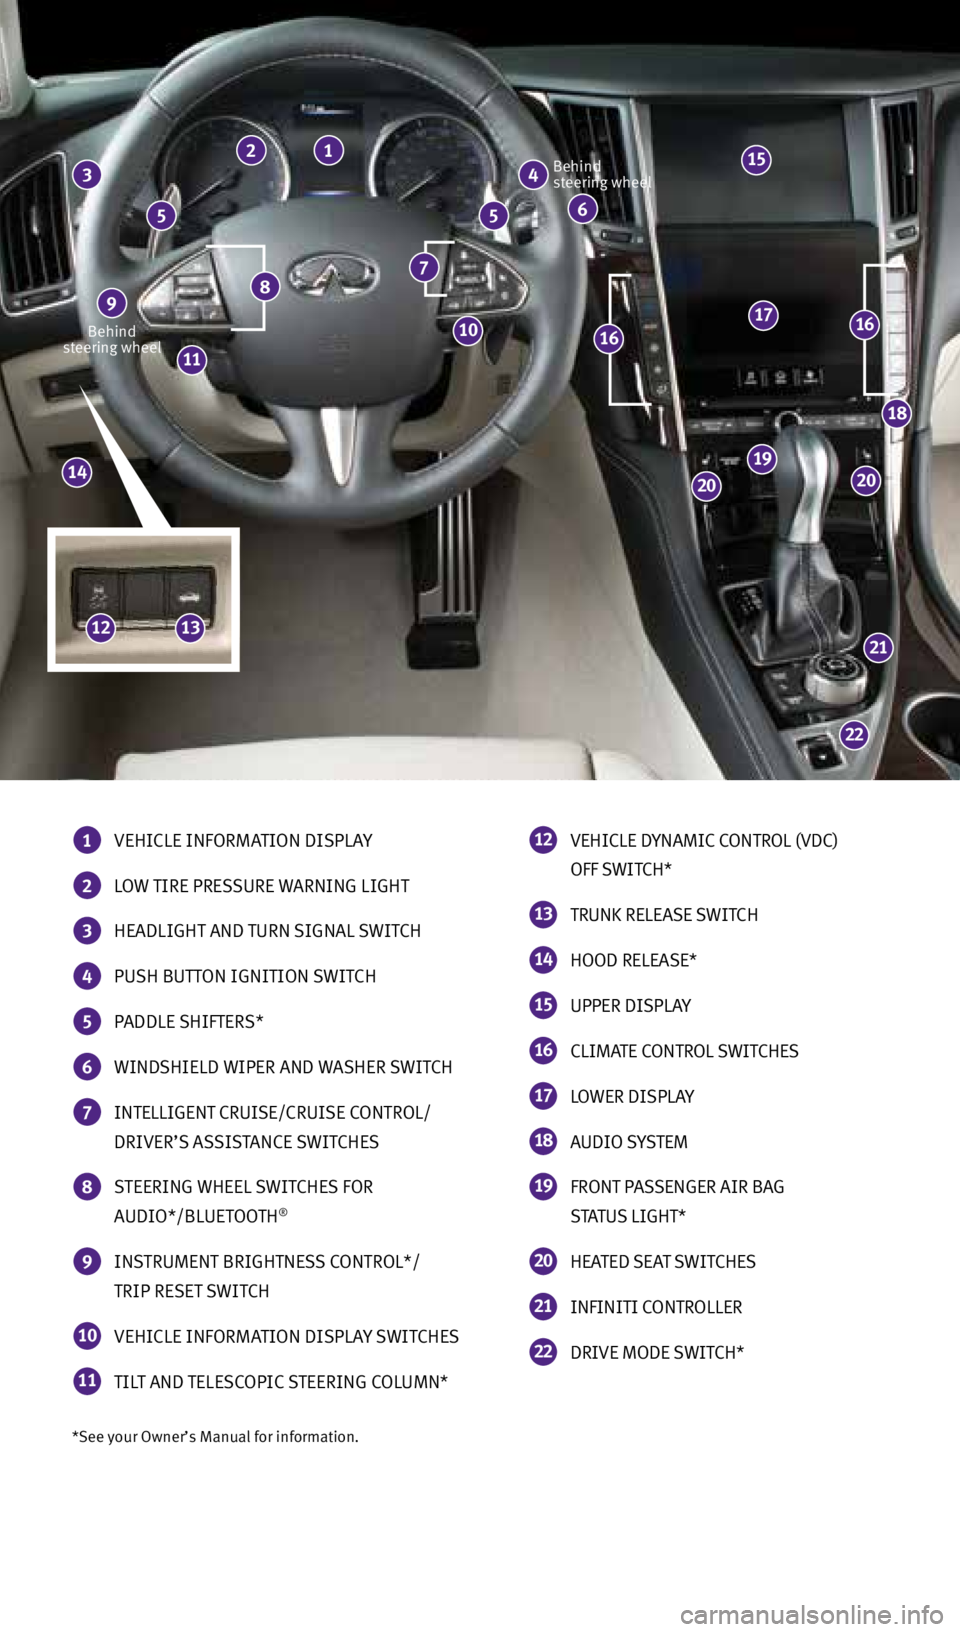 INFINITI Q50 2015  Quick Reference Guide *See your Owner’s Manual for information.
Behind 
steering wheel Behind 
steering wheel
 
1   VEHICLE INFORMATION DISPLAY
 
2   LOW TIRE PRESSURE WARNING LIGHT
 
3   HEADLIGHT AND TURN SIGNAL SWITCH